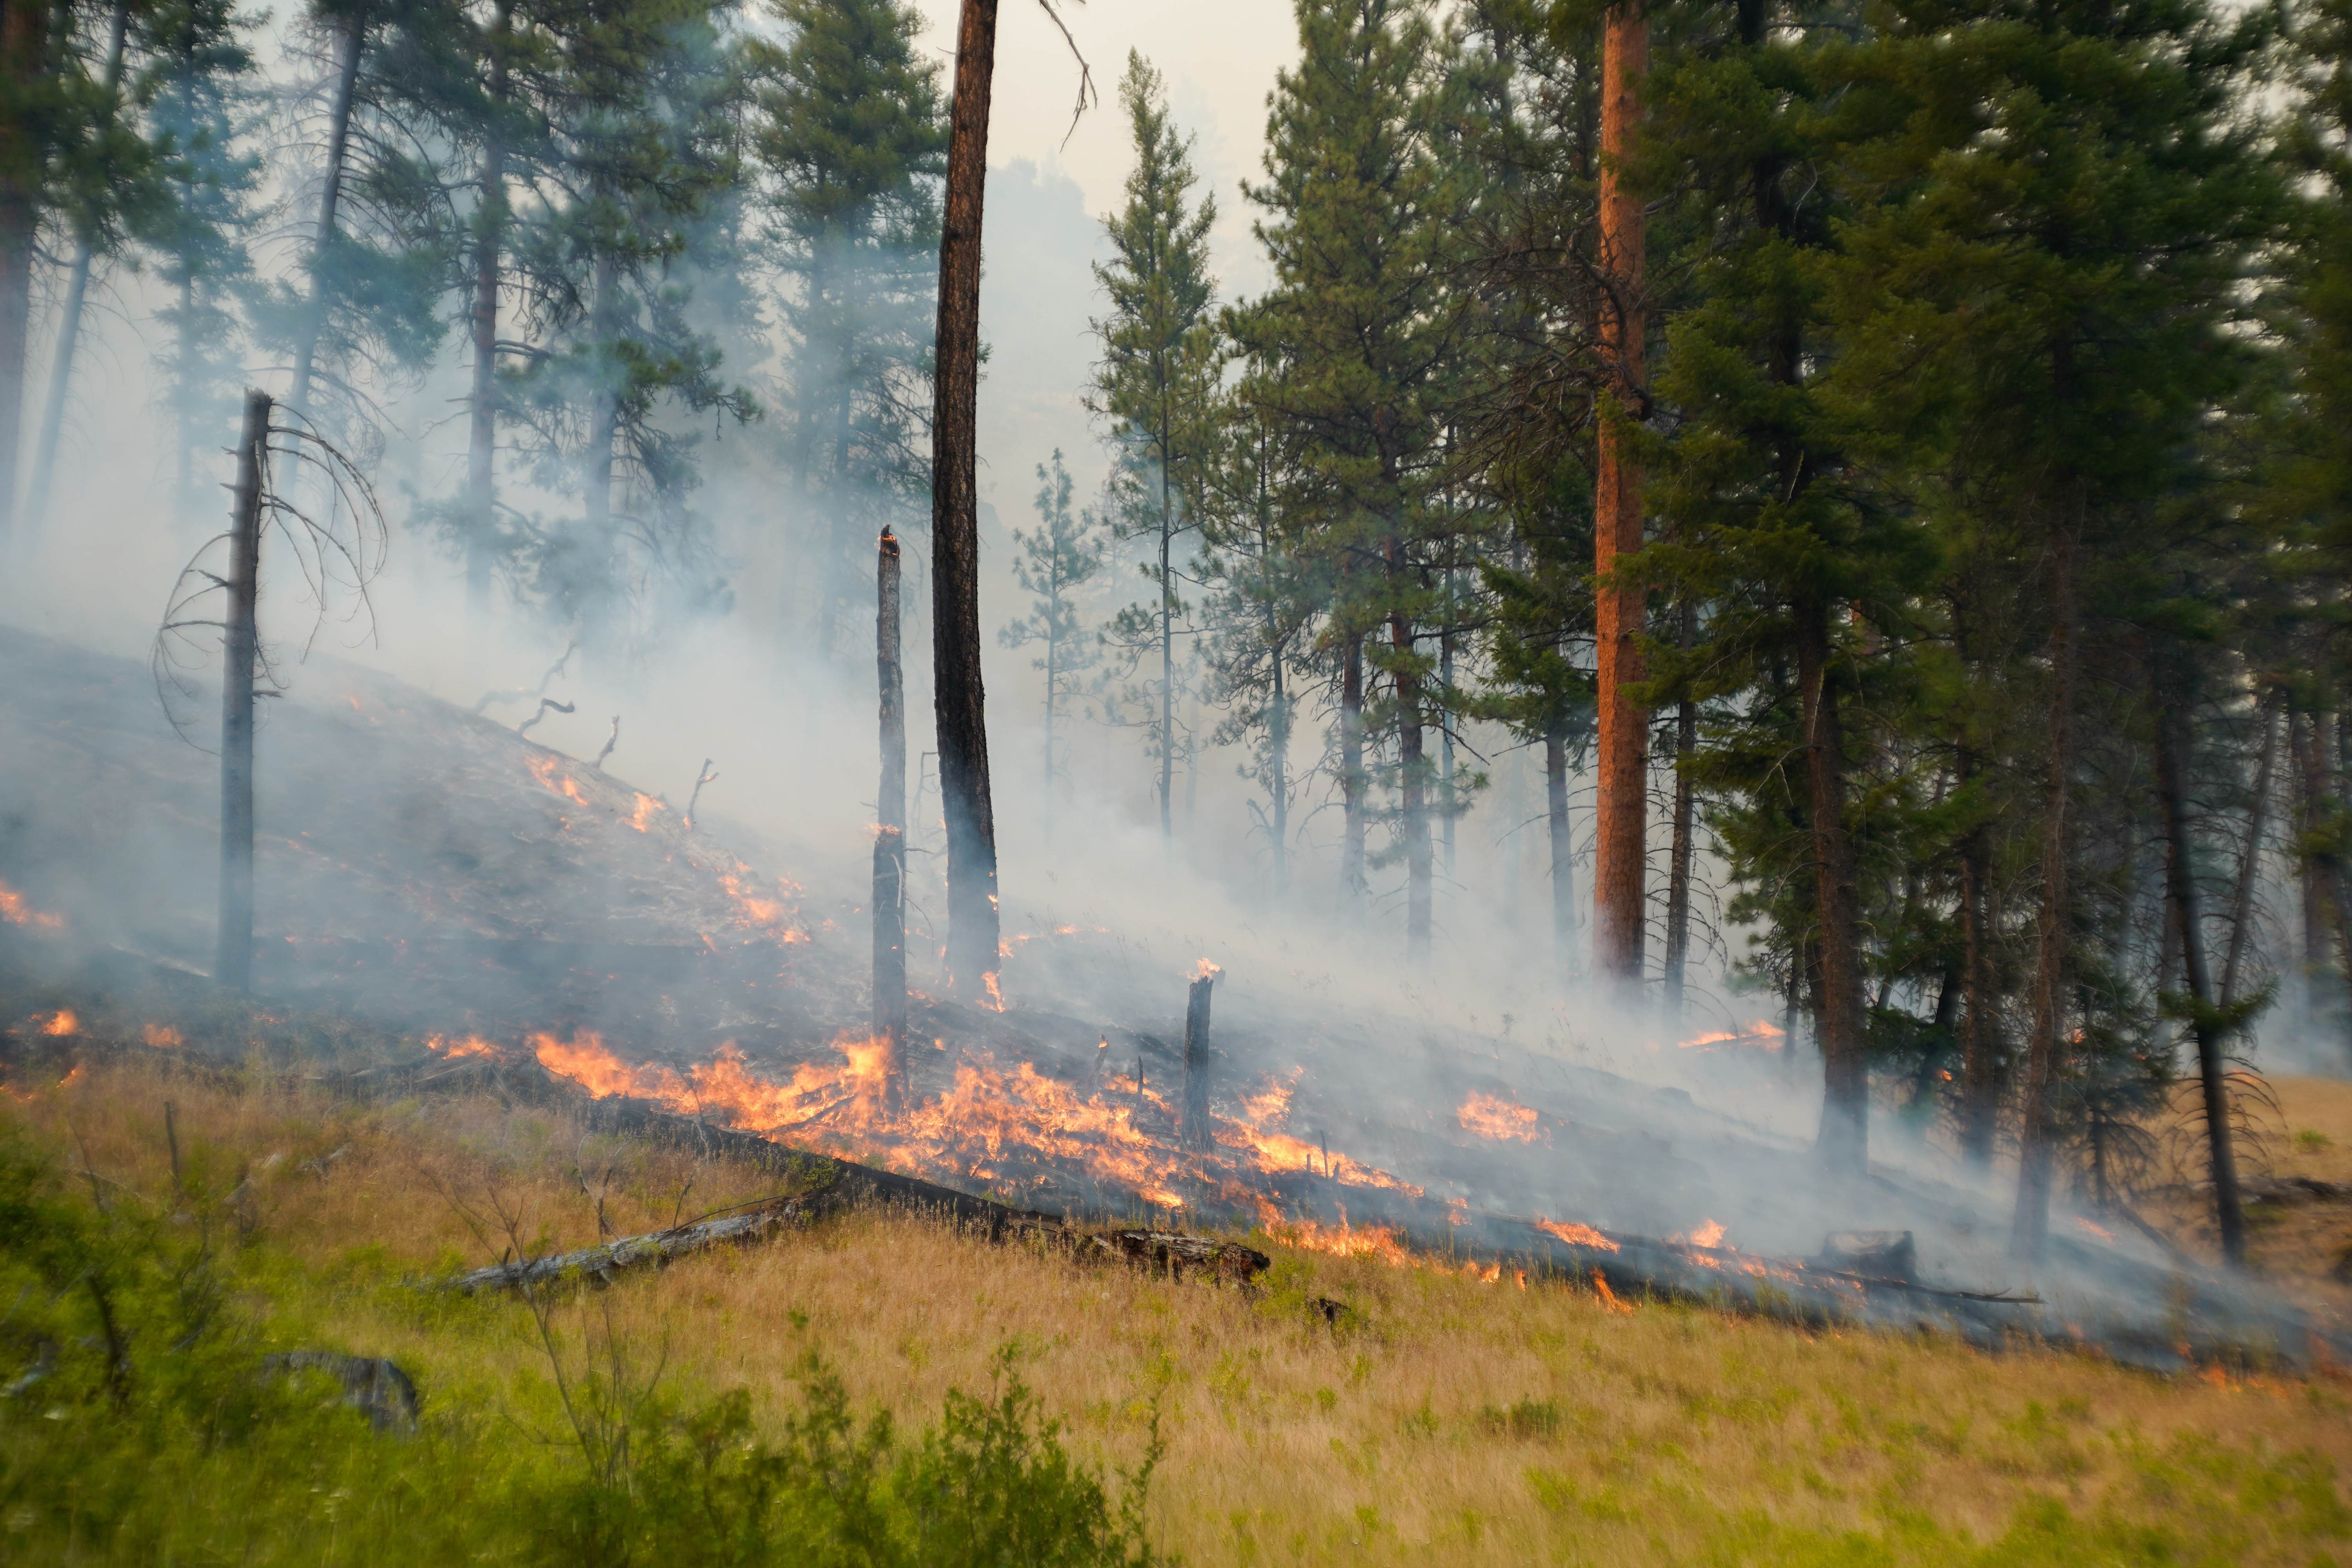 

						Grass and Timber burning on the Snake Fire
			